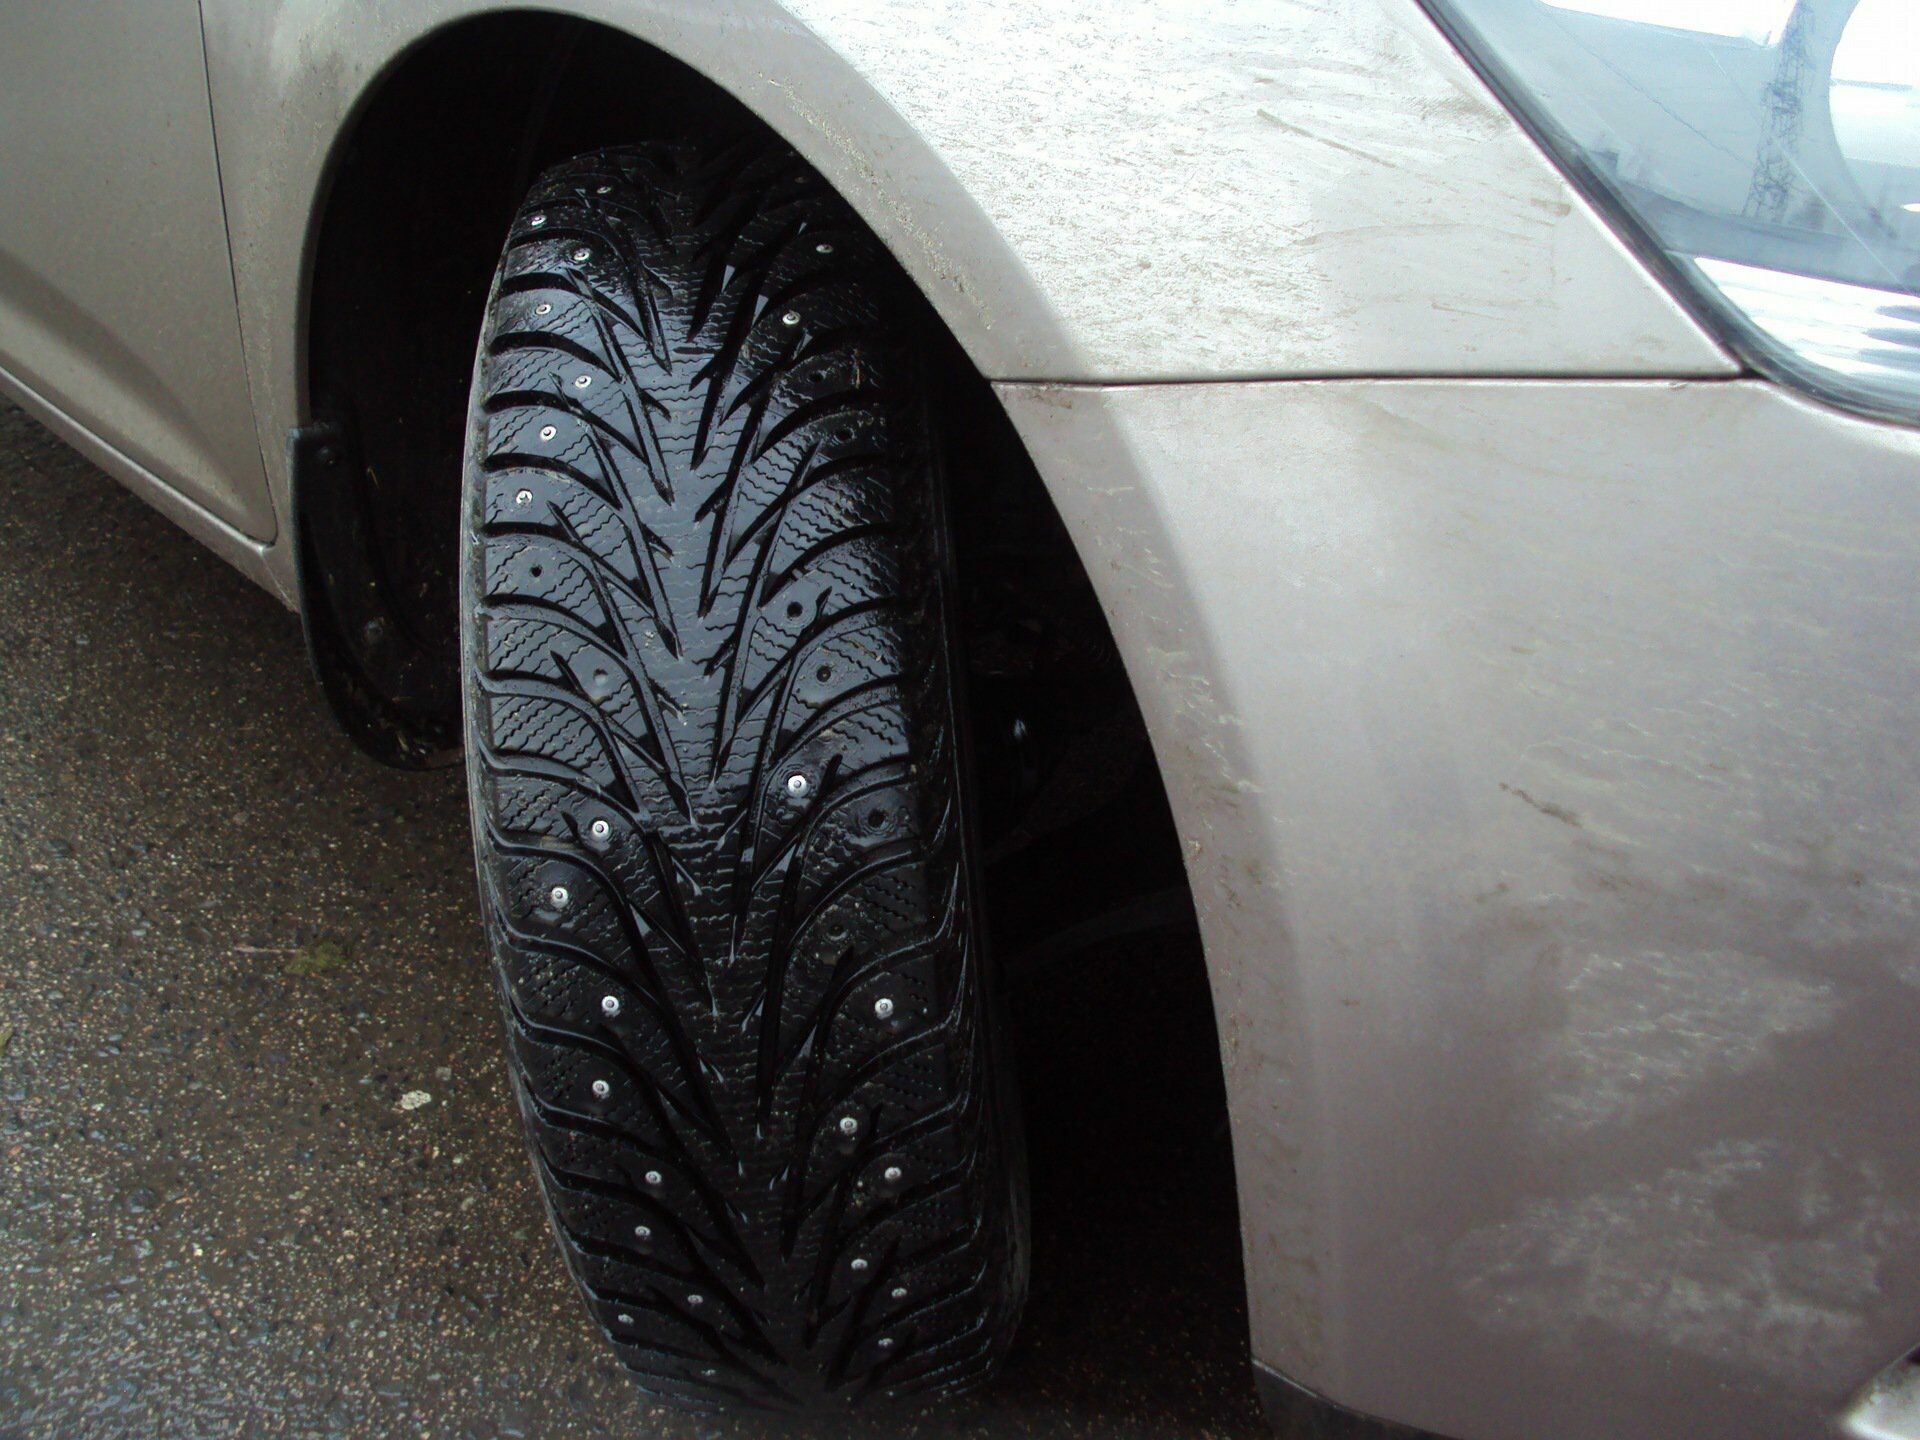 From June 1, drivers will be fined for winter tires